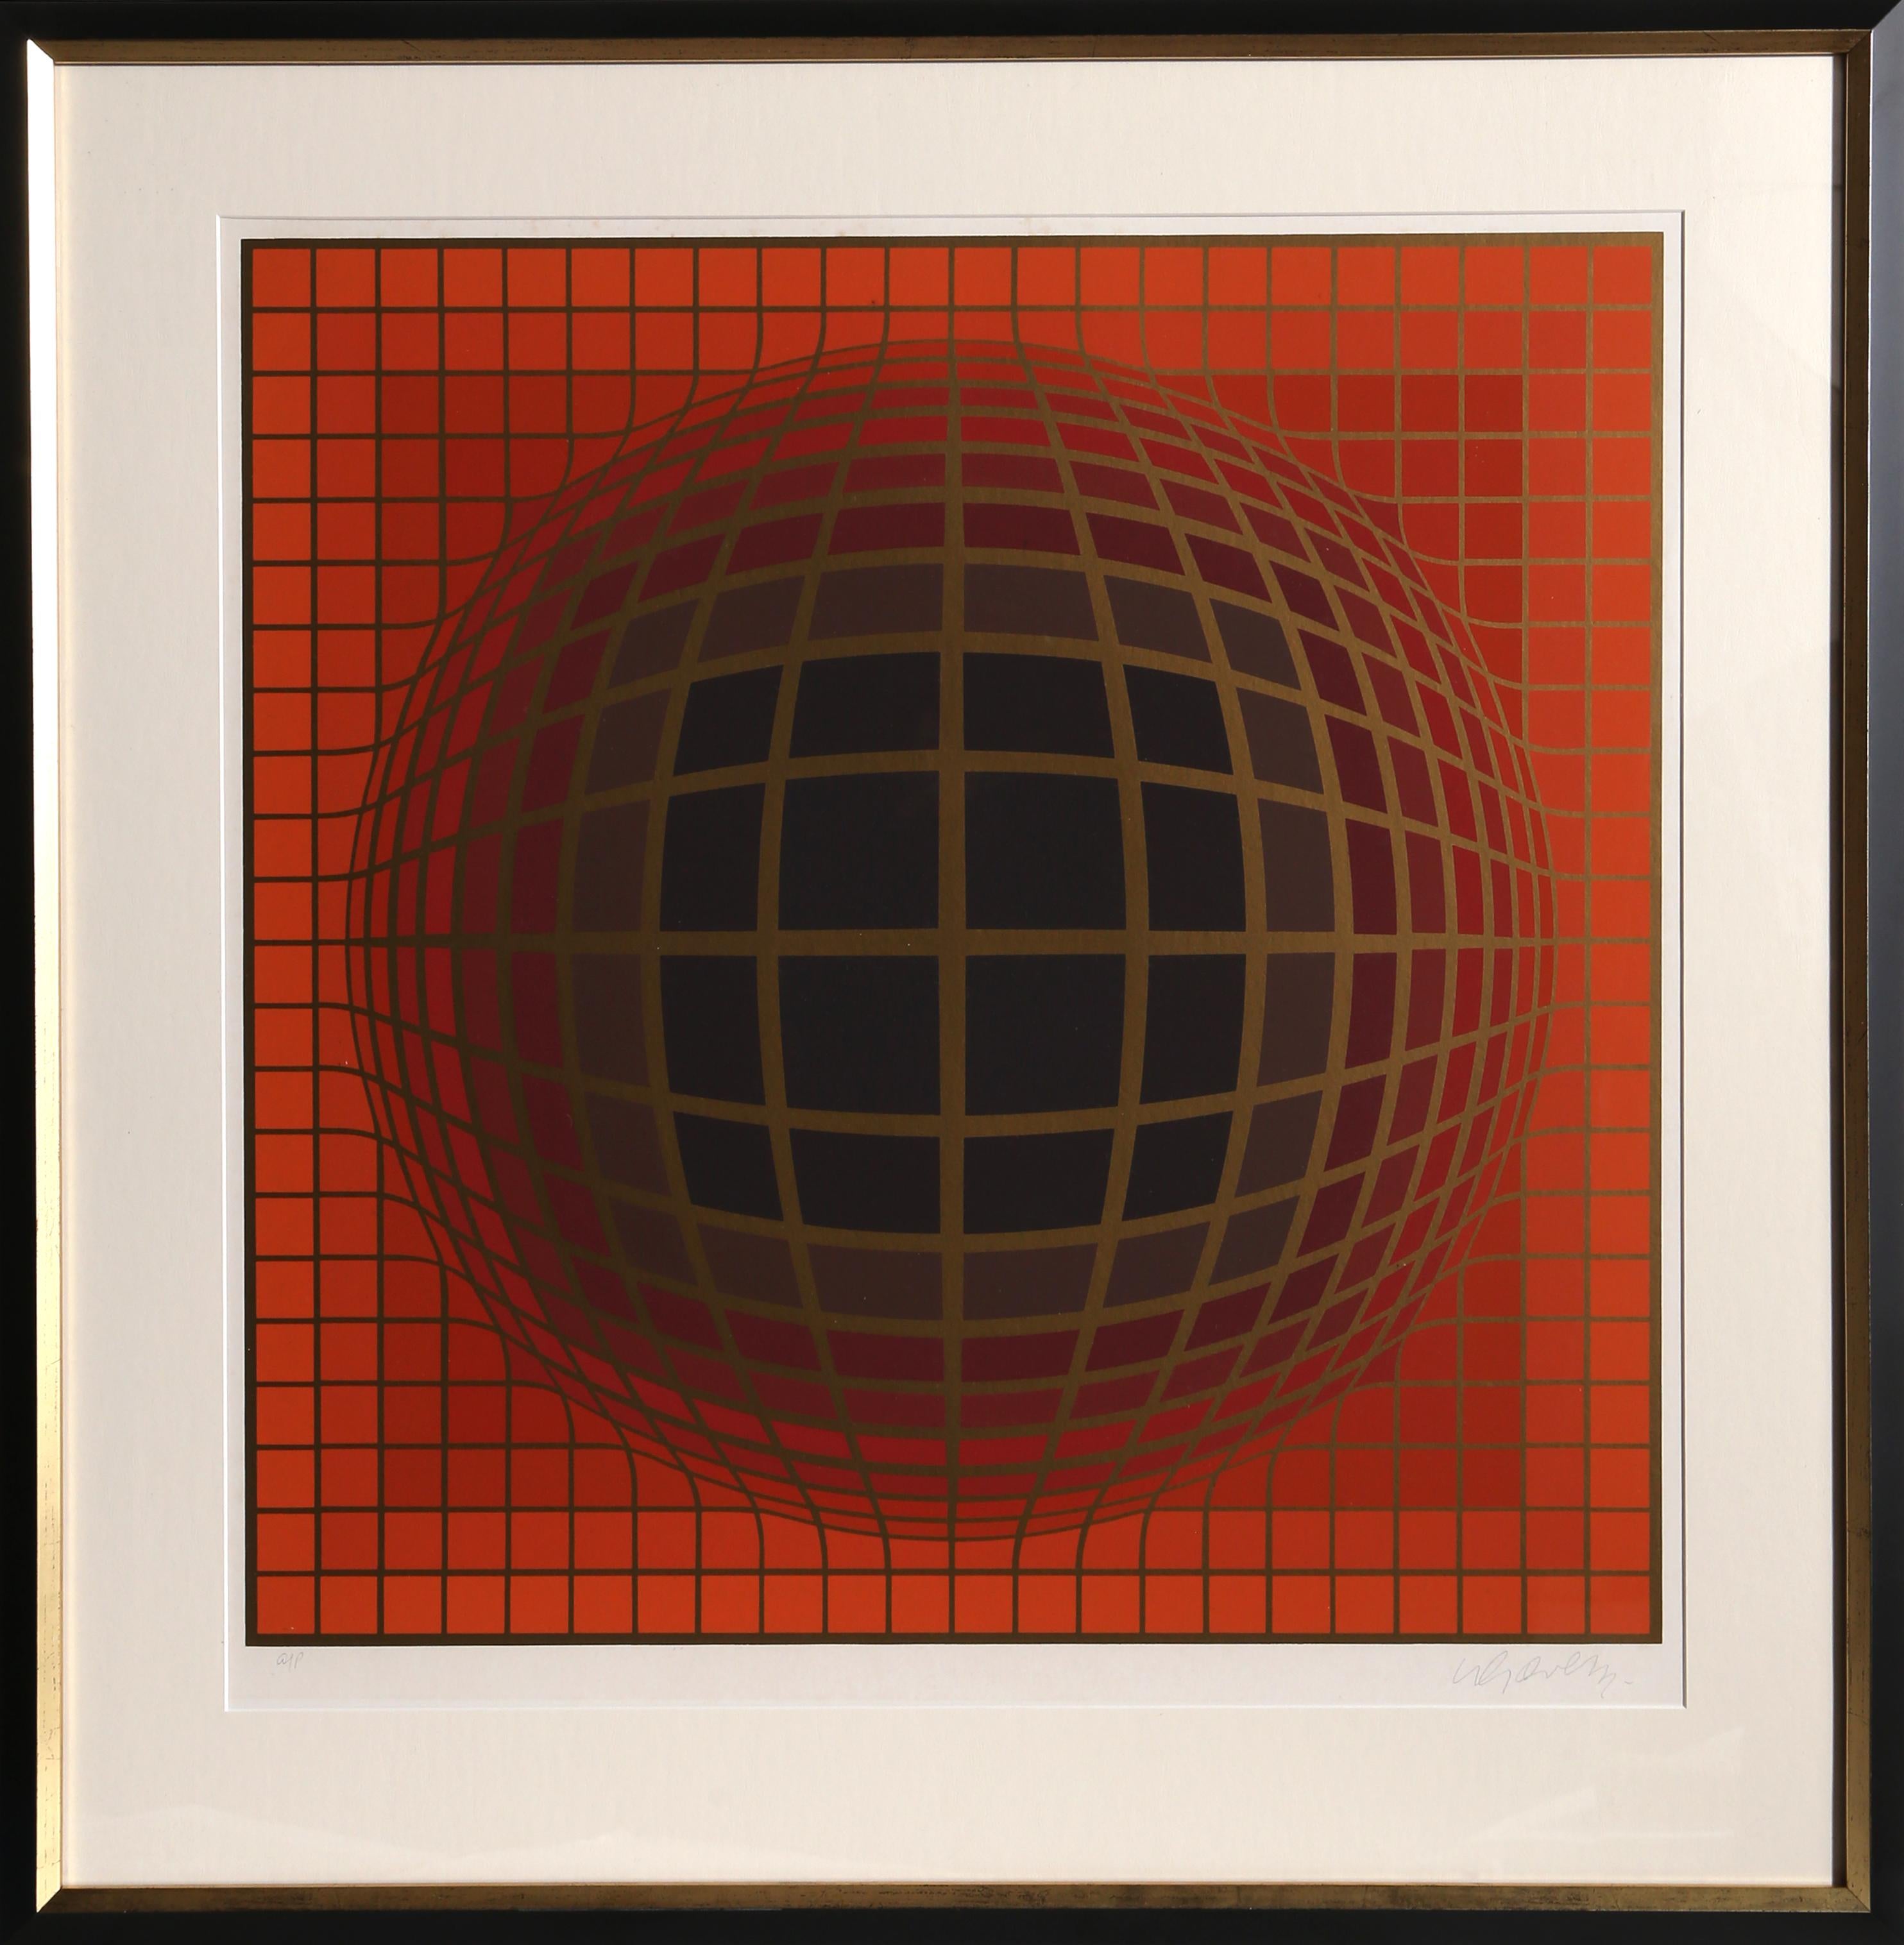 Victor Vasarely Abstract Print - Series 1, Framed OP Art Screenprint by Vasarely